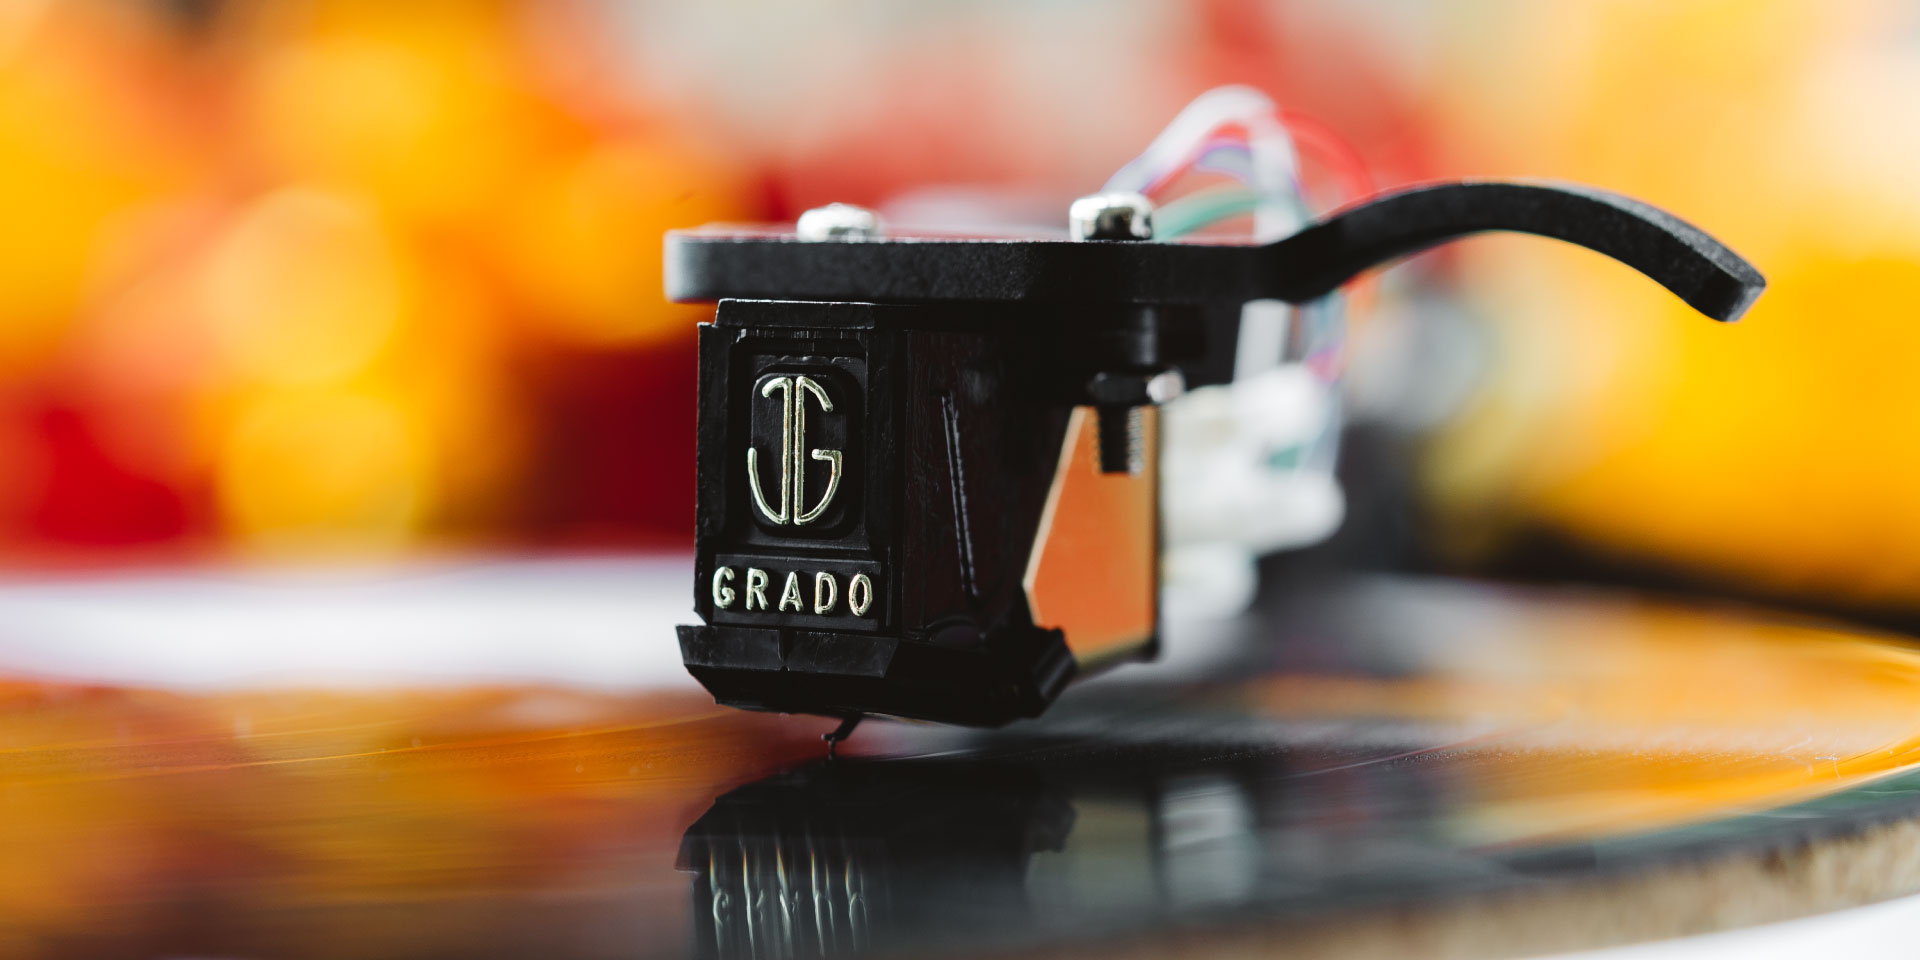 Photo of Grado Gold3 / Silver3 Phono Cartridge playing a record in front of a blurred orange background